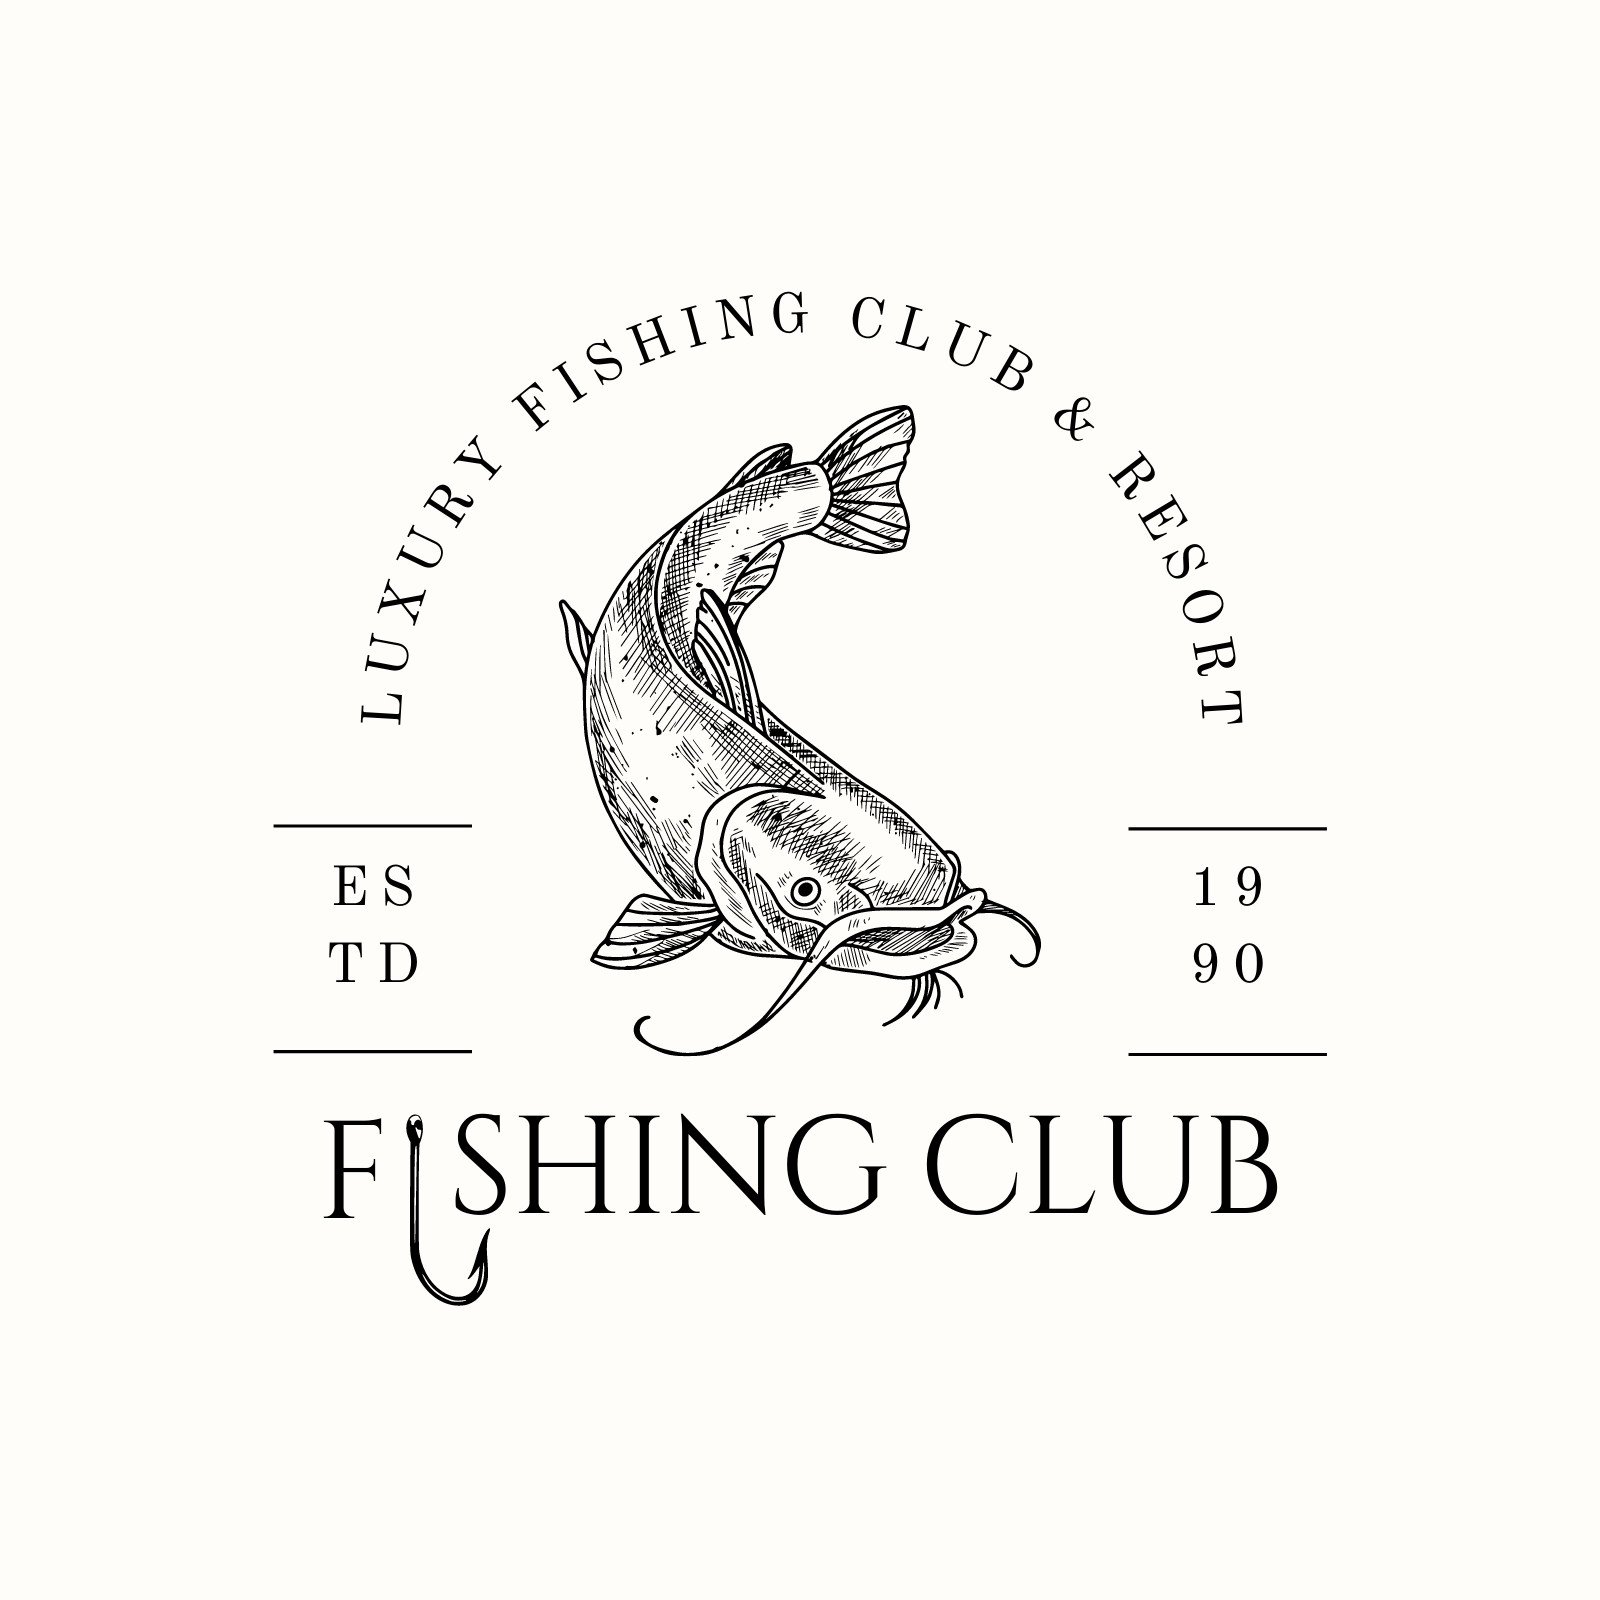 Fishing club hoodie with customised logo! Back print also